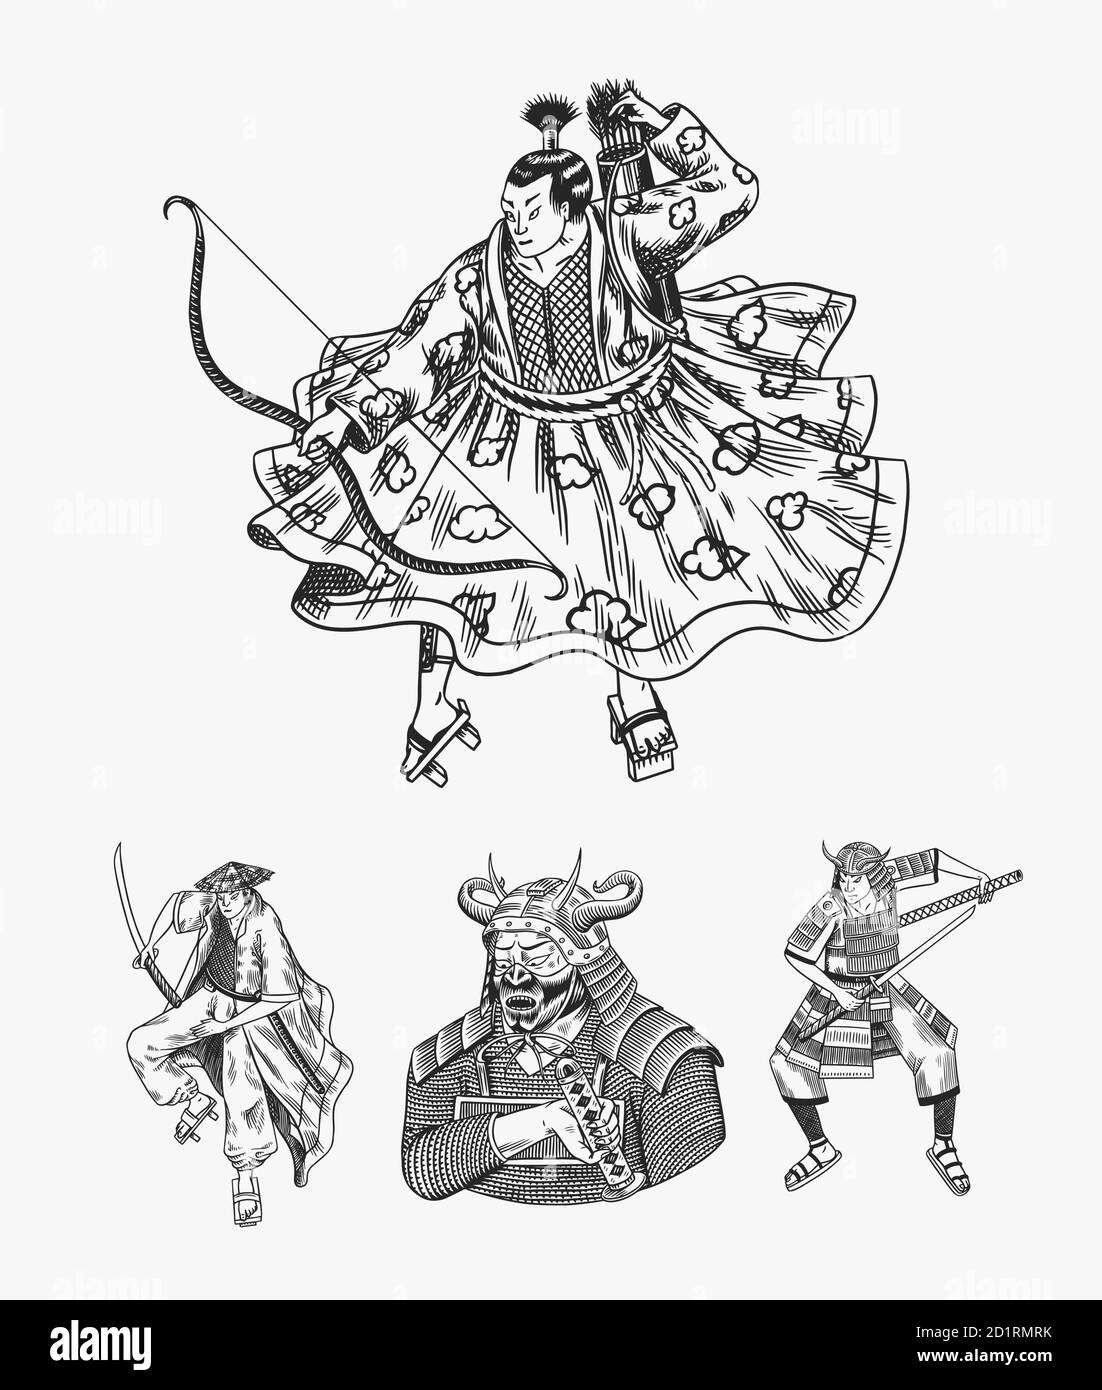 Japanese samurai set. Warriors with weapons sketch. Men in a fight pose. Hand drawn vintage sketches. Vector illustration in monochrome style. Stock Vector